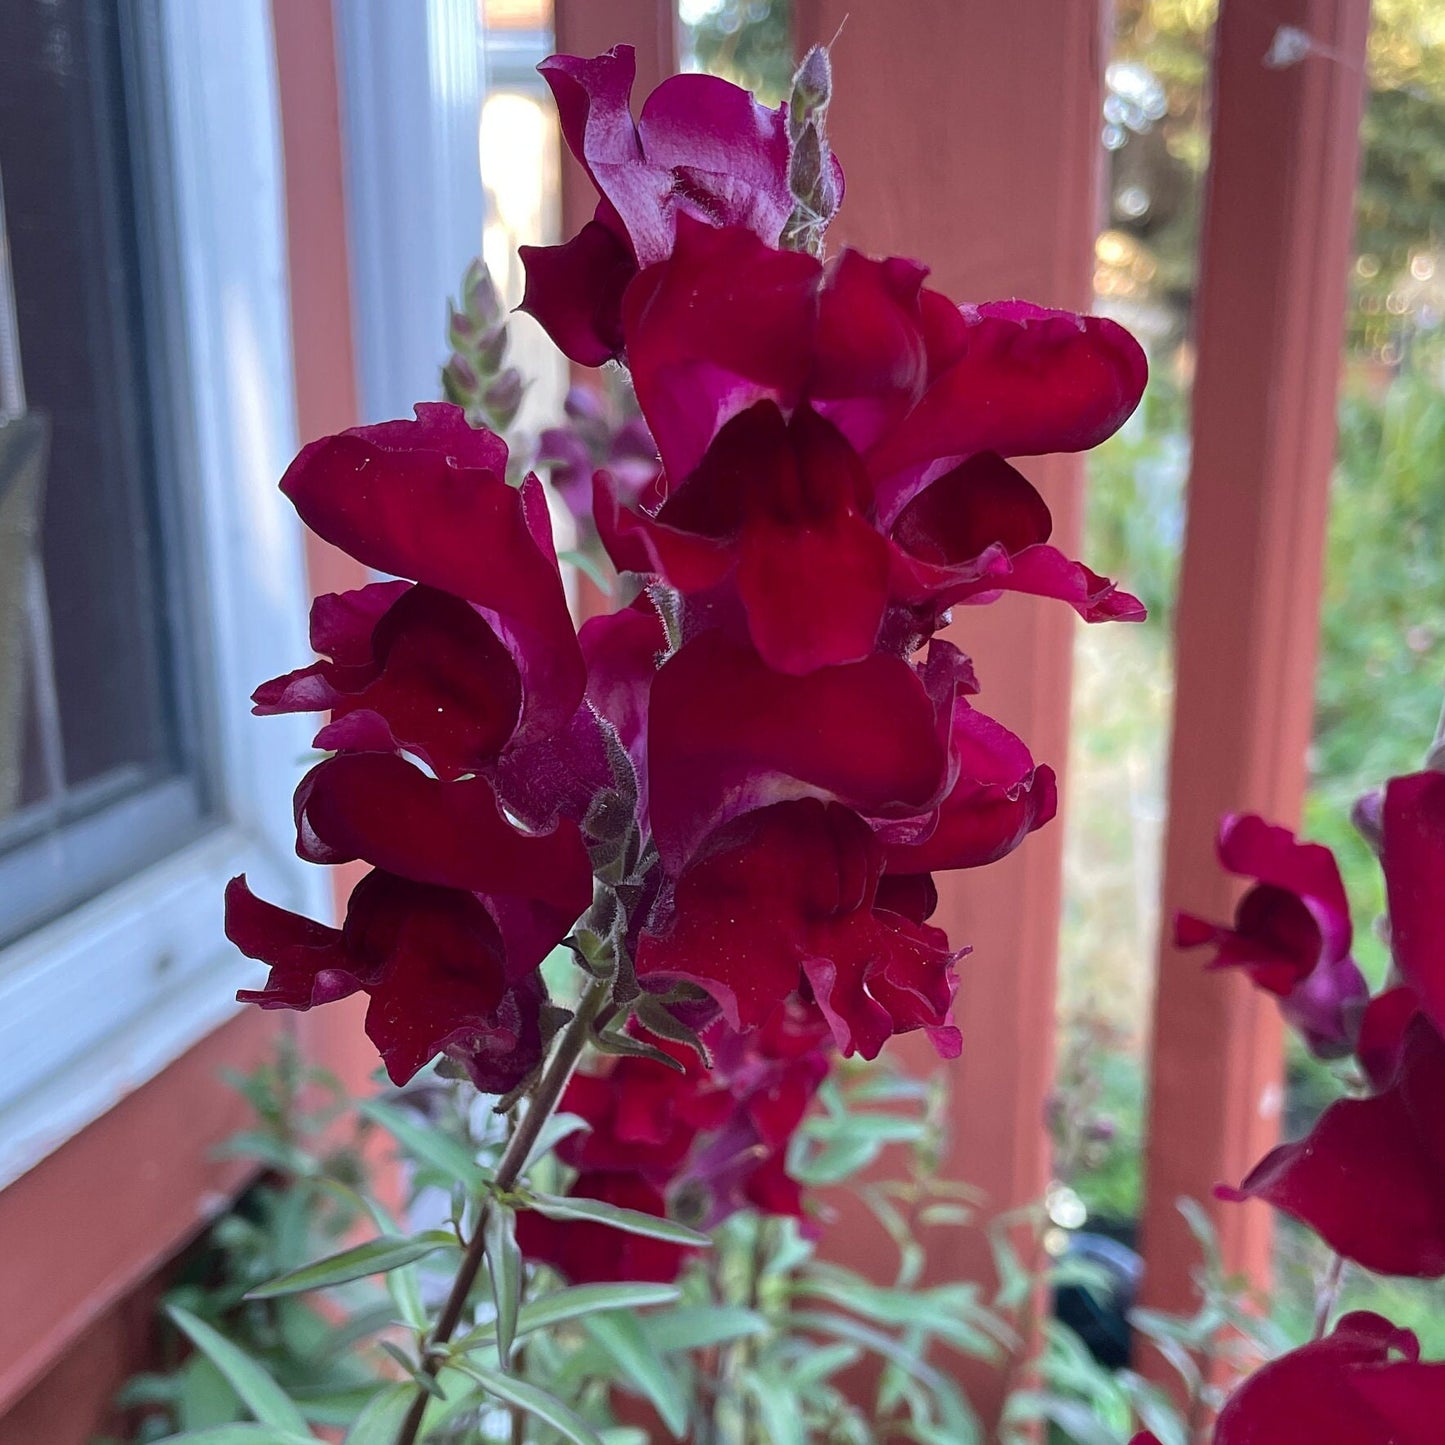 Snap Dragon - Flower Seeds - Tall Variety - Perfect for Stunning Cut Flowers